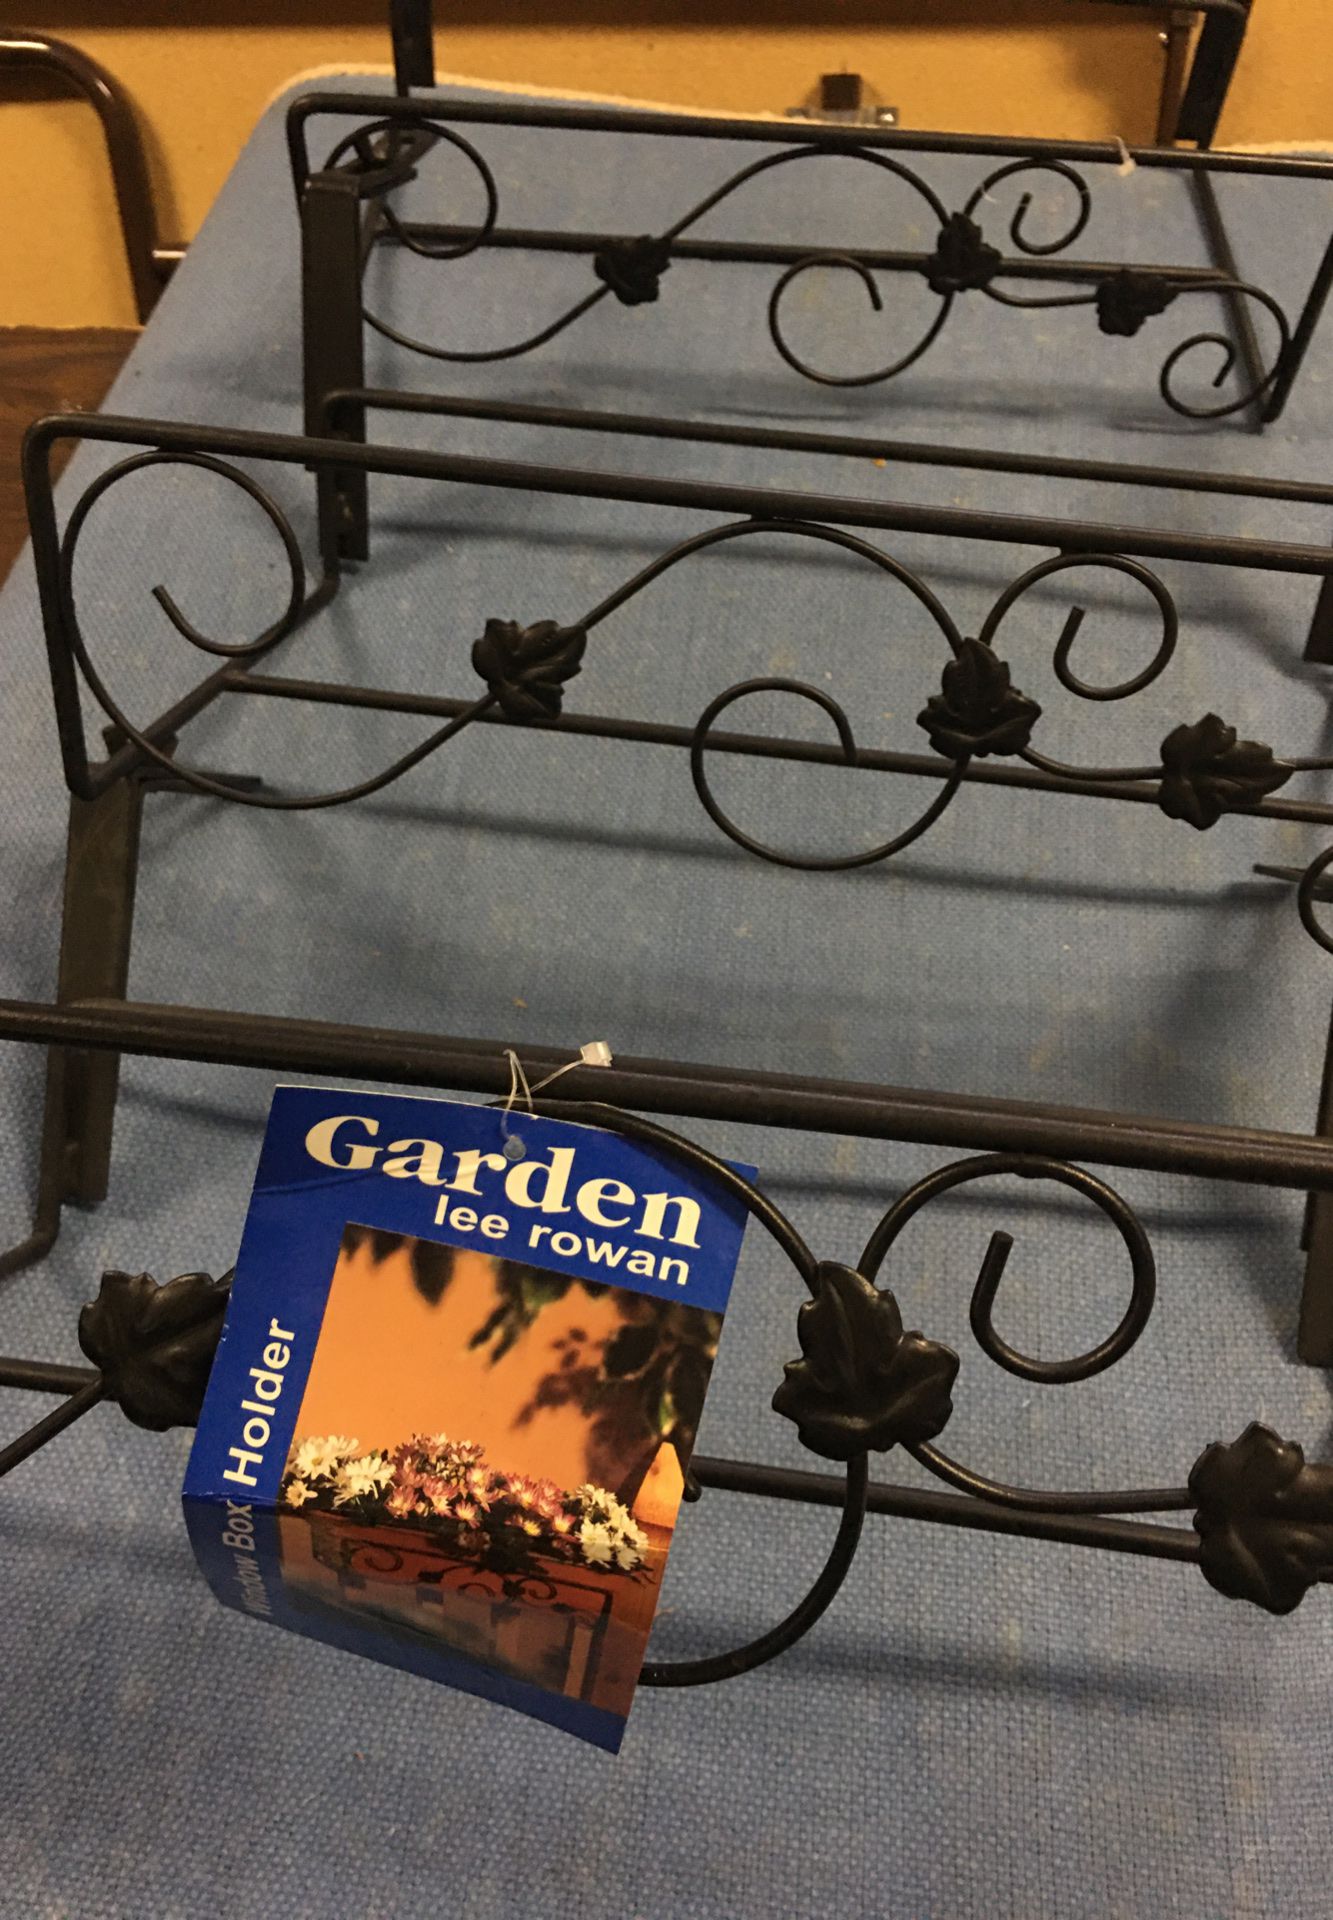 3 WINDOW BOX OR DECK RAILING PLANT HOLDERS $10 Each 3 for $30